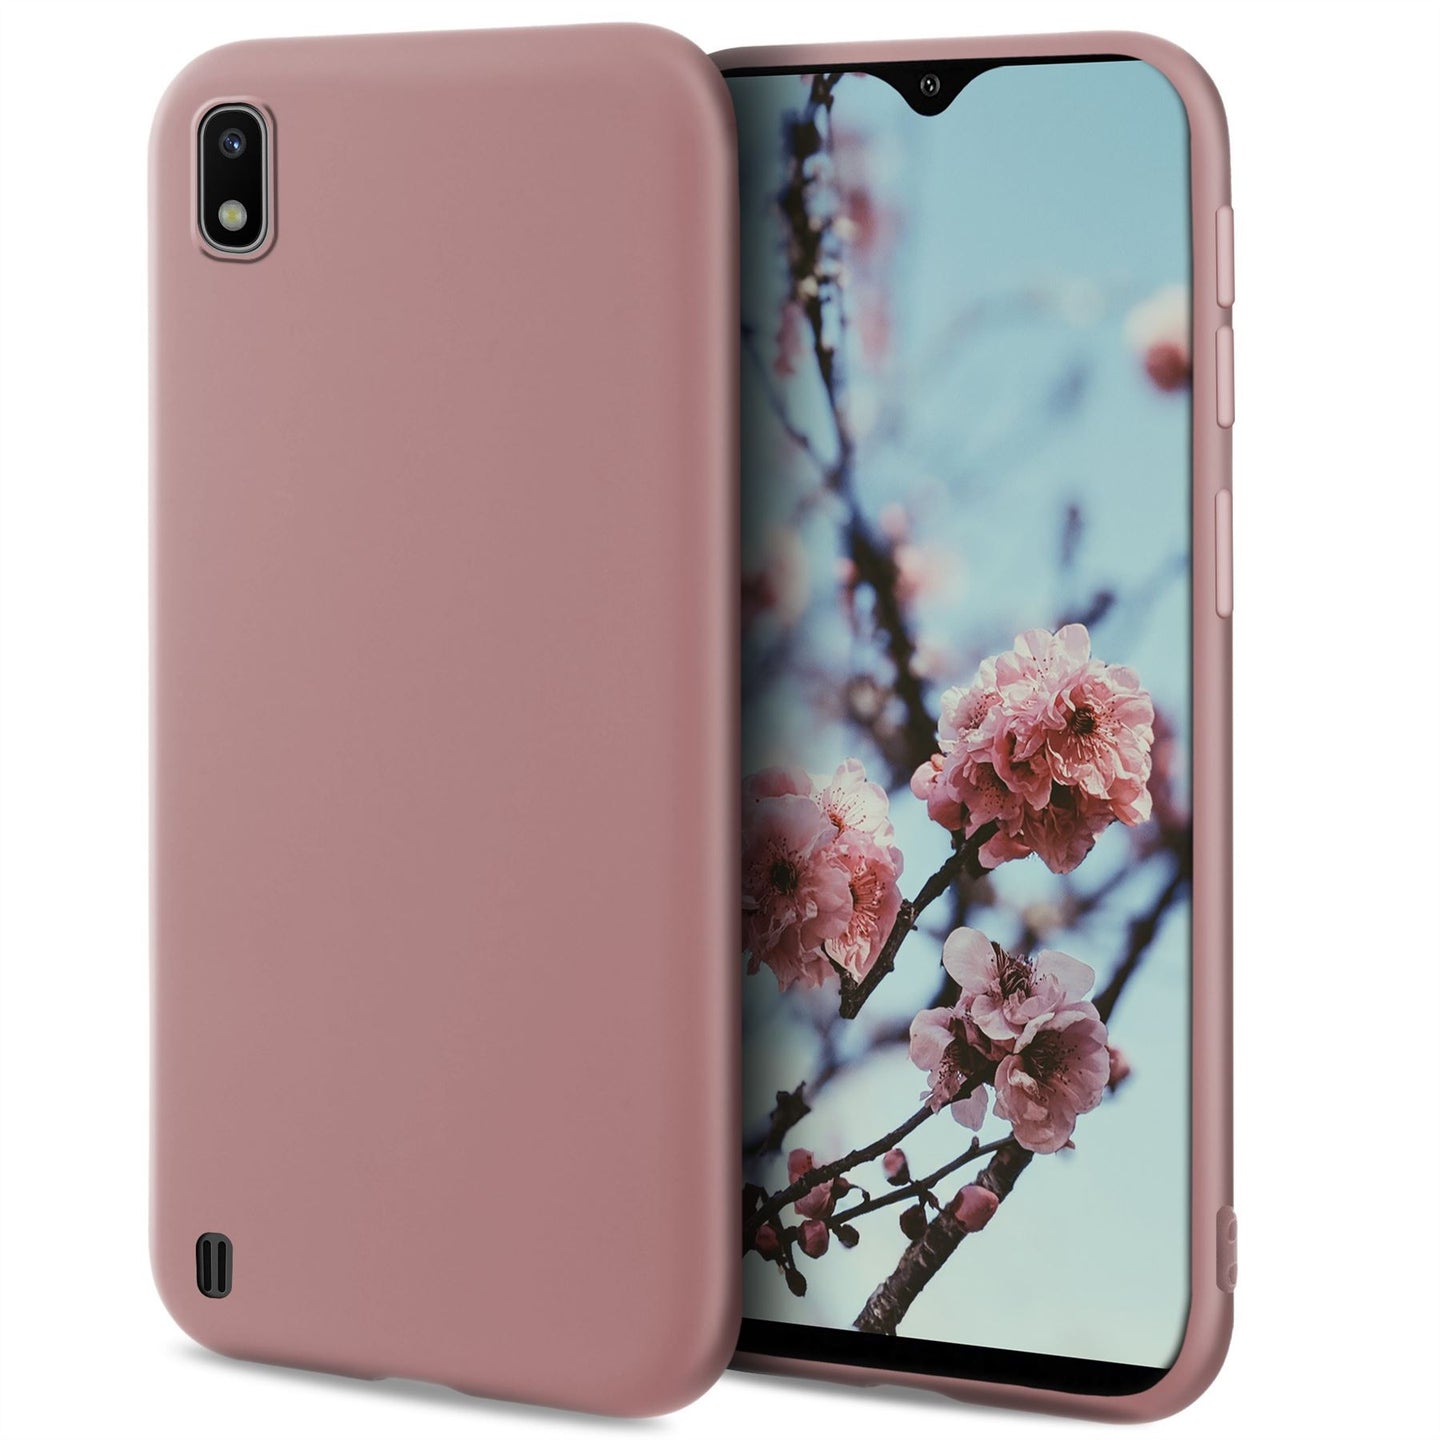 Moozy Minimalist Series Silicone Case for Samsung A10, Rose Beige - Matte Finish Slim Soft TPU Cover